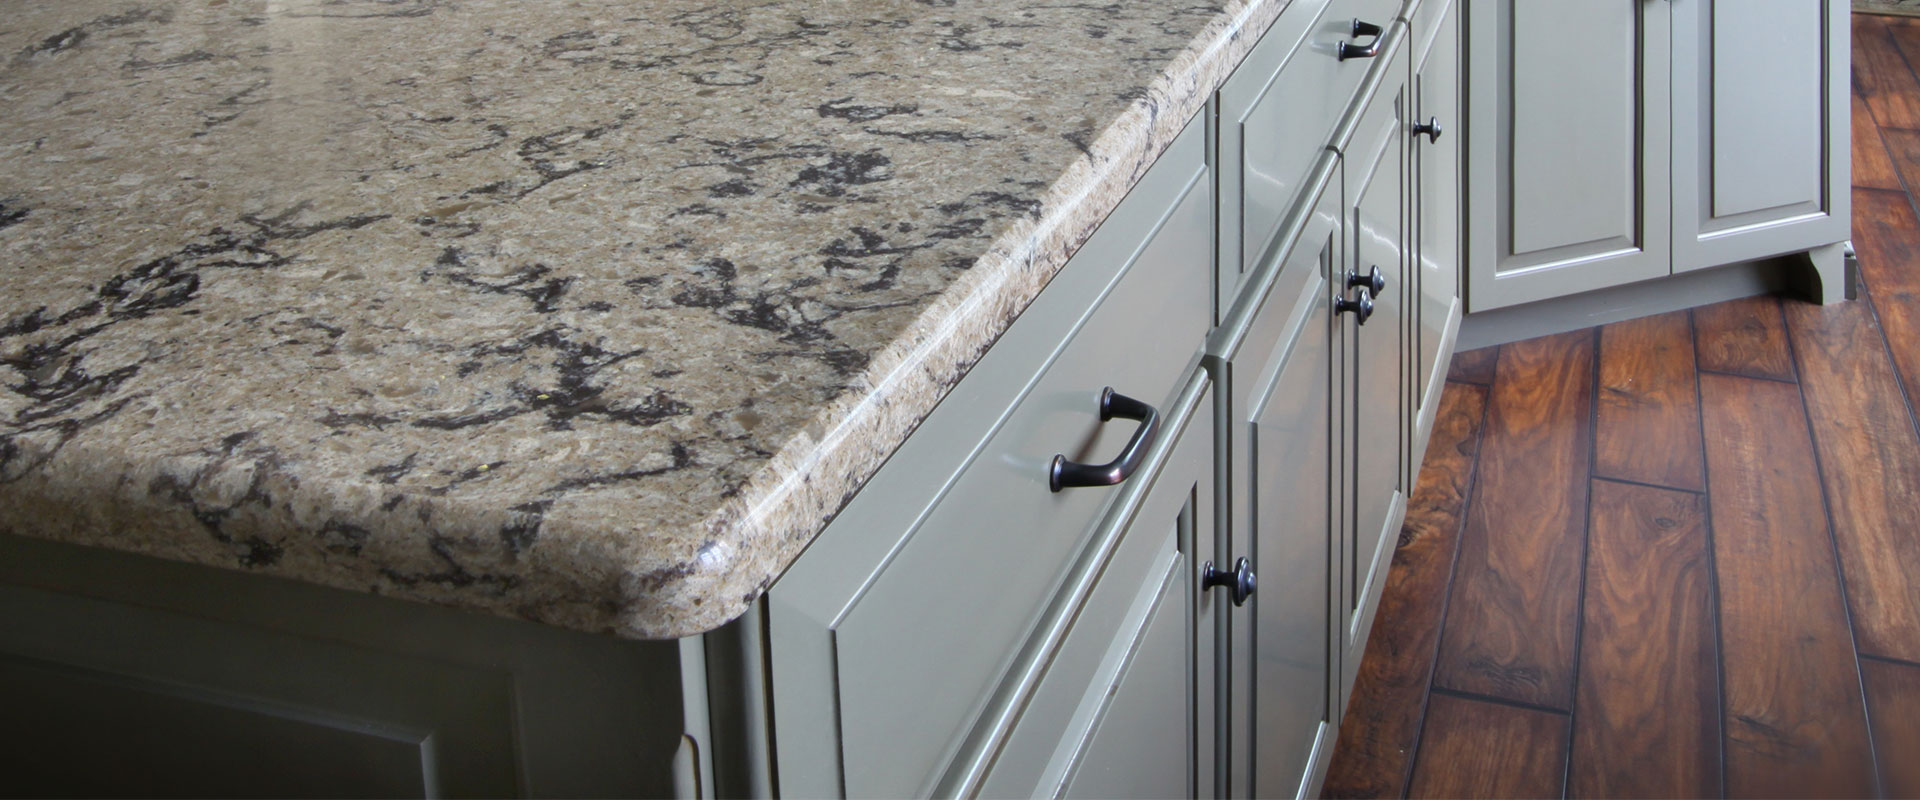 Quality Kitchen Countertops Bathroom Counter Installation In